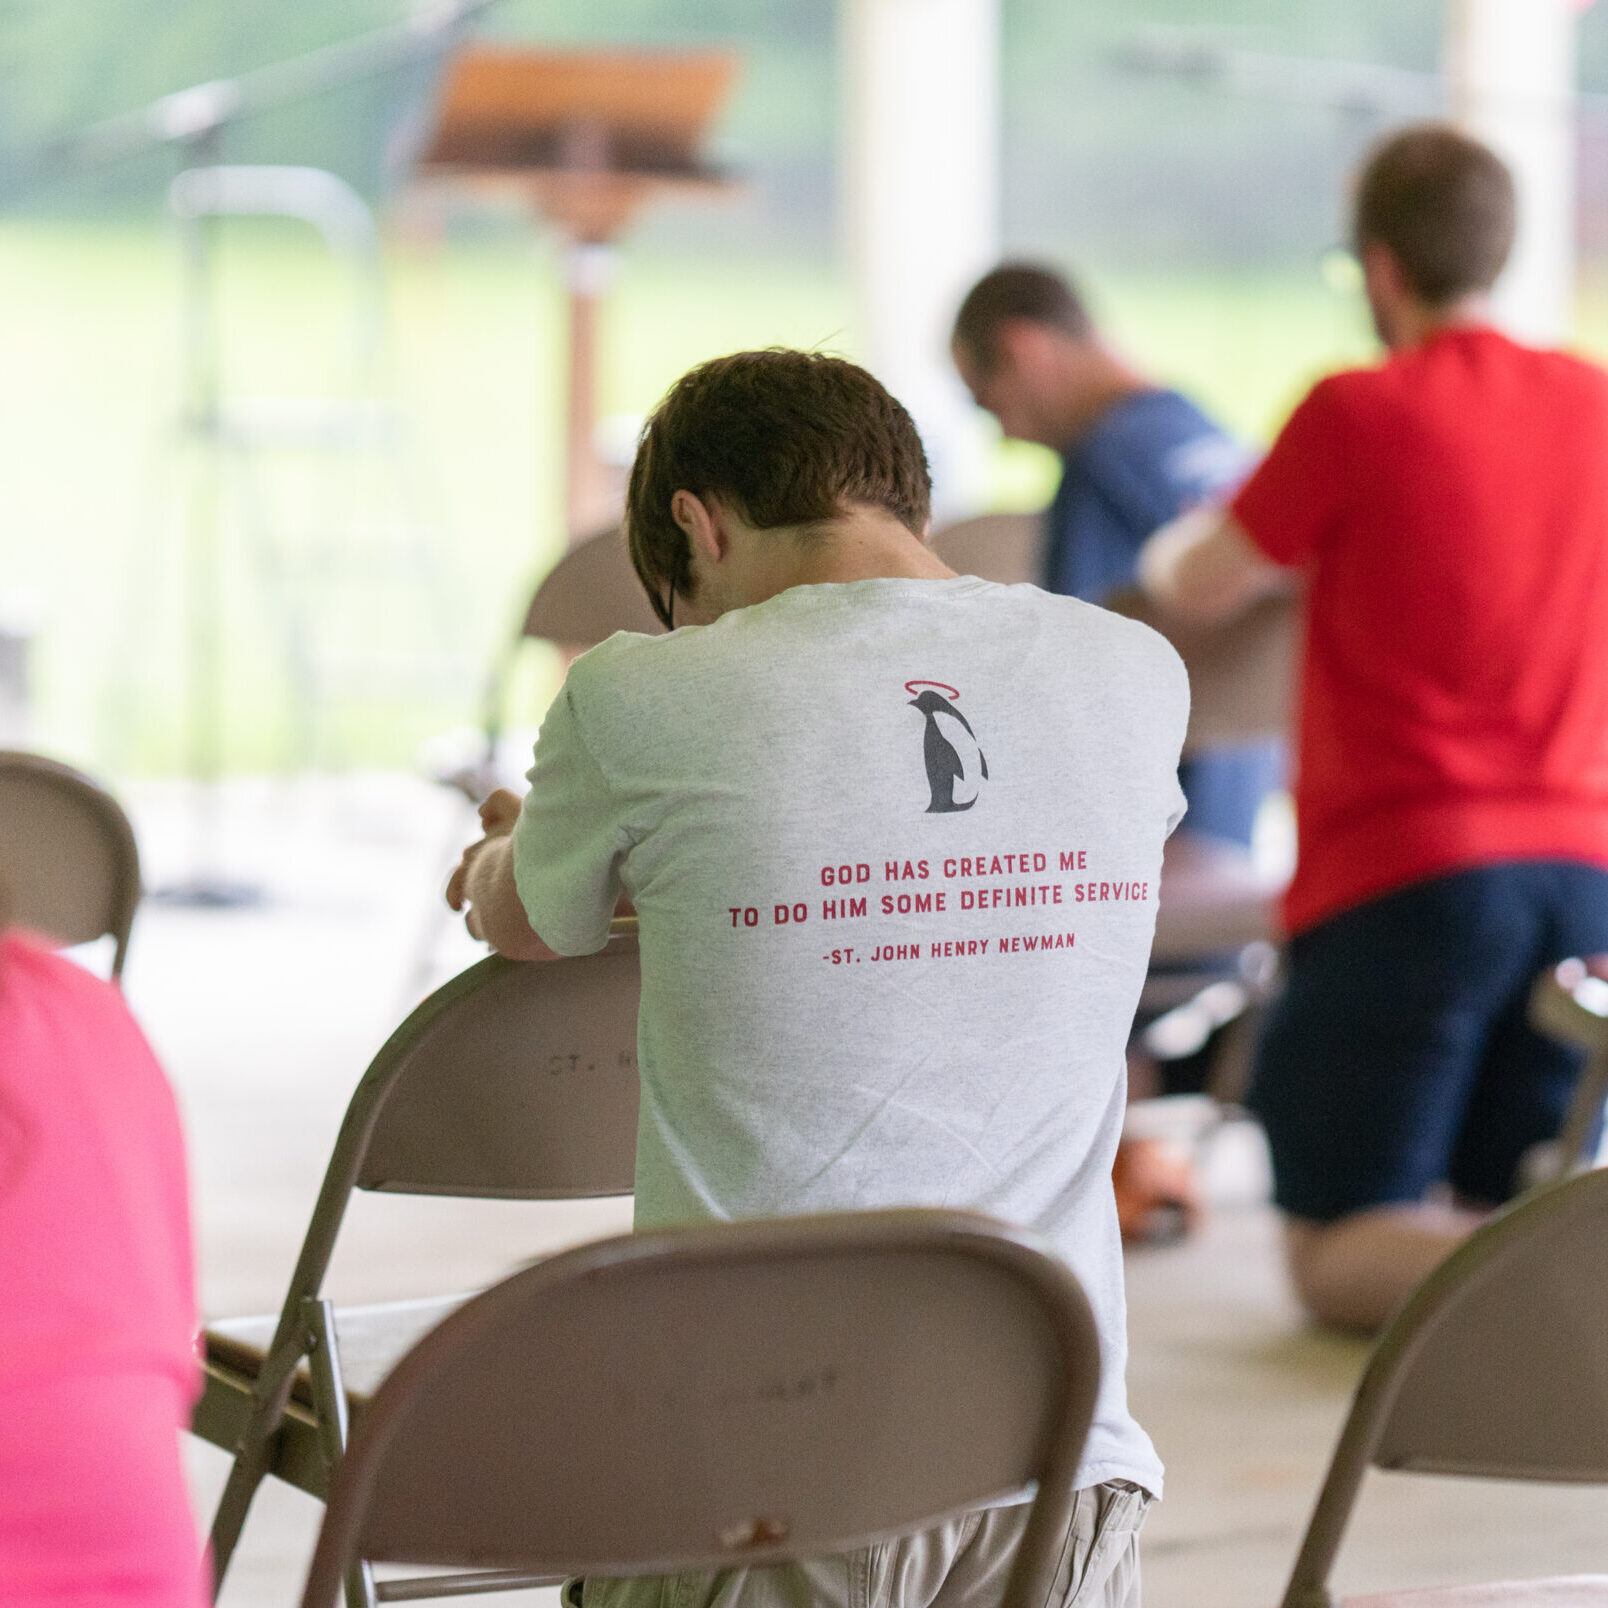 Young adult bowed in prayer with t-shirt reading "God has created me to do him some definite service." -St. John Henry Newman